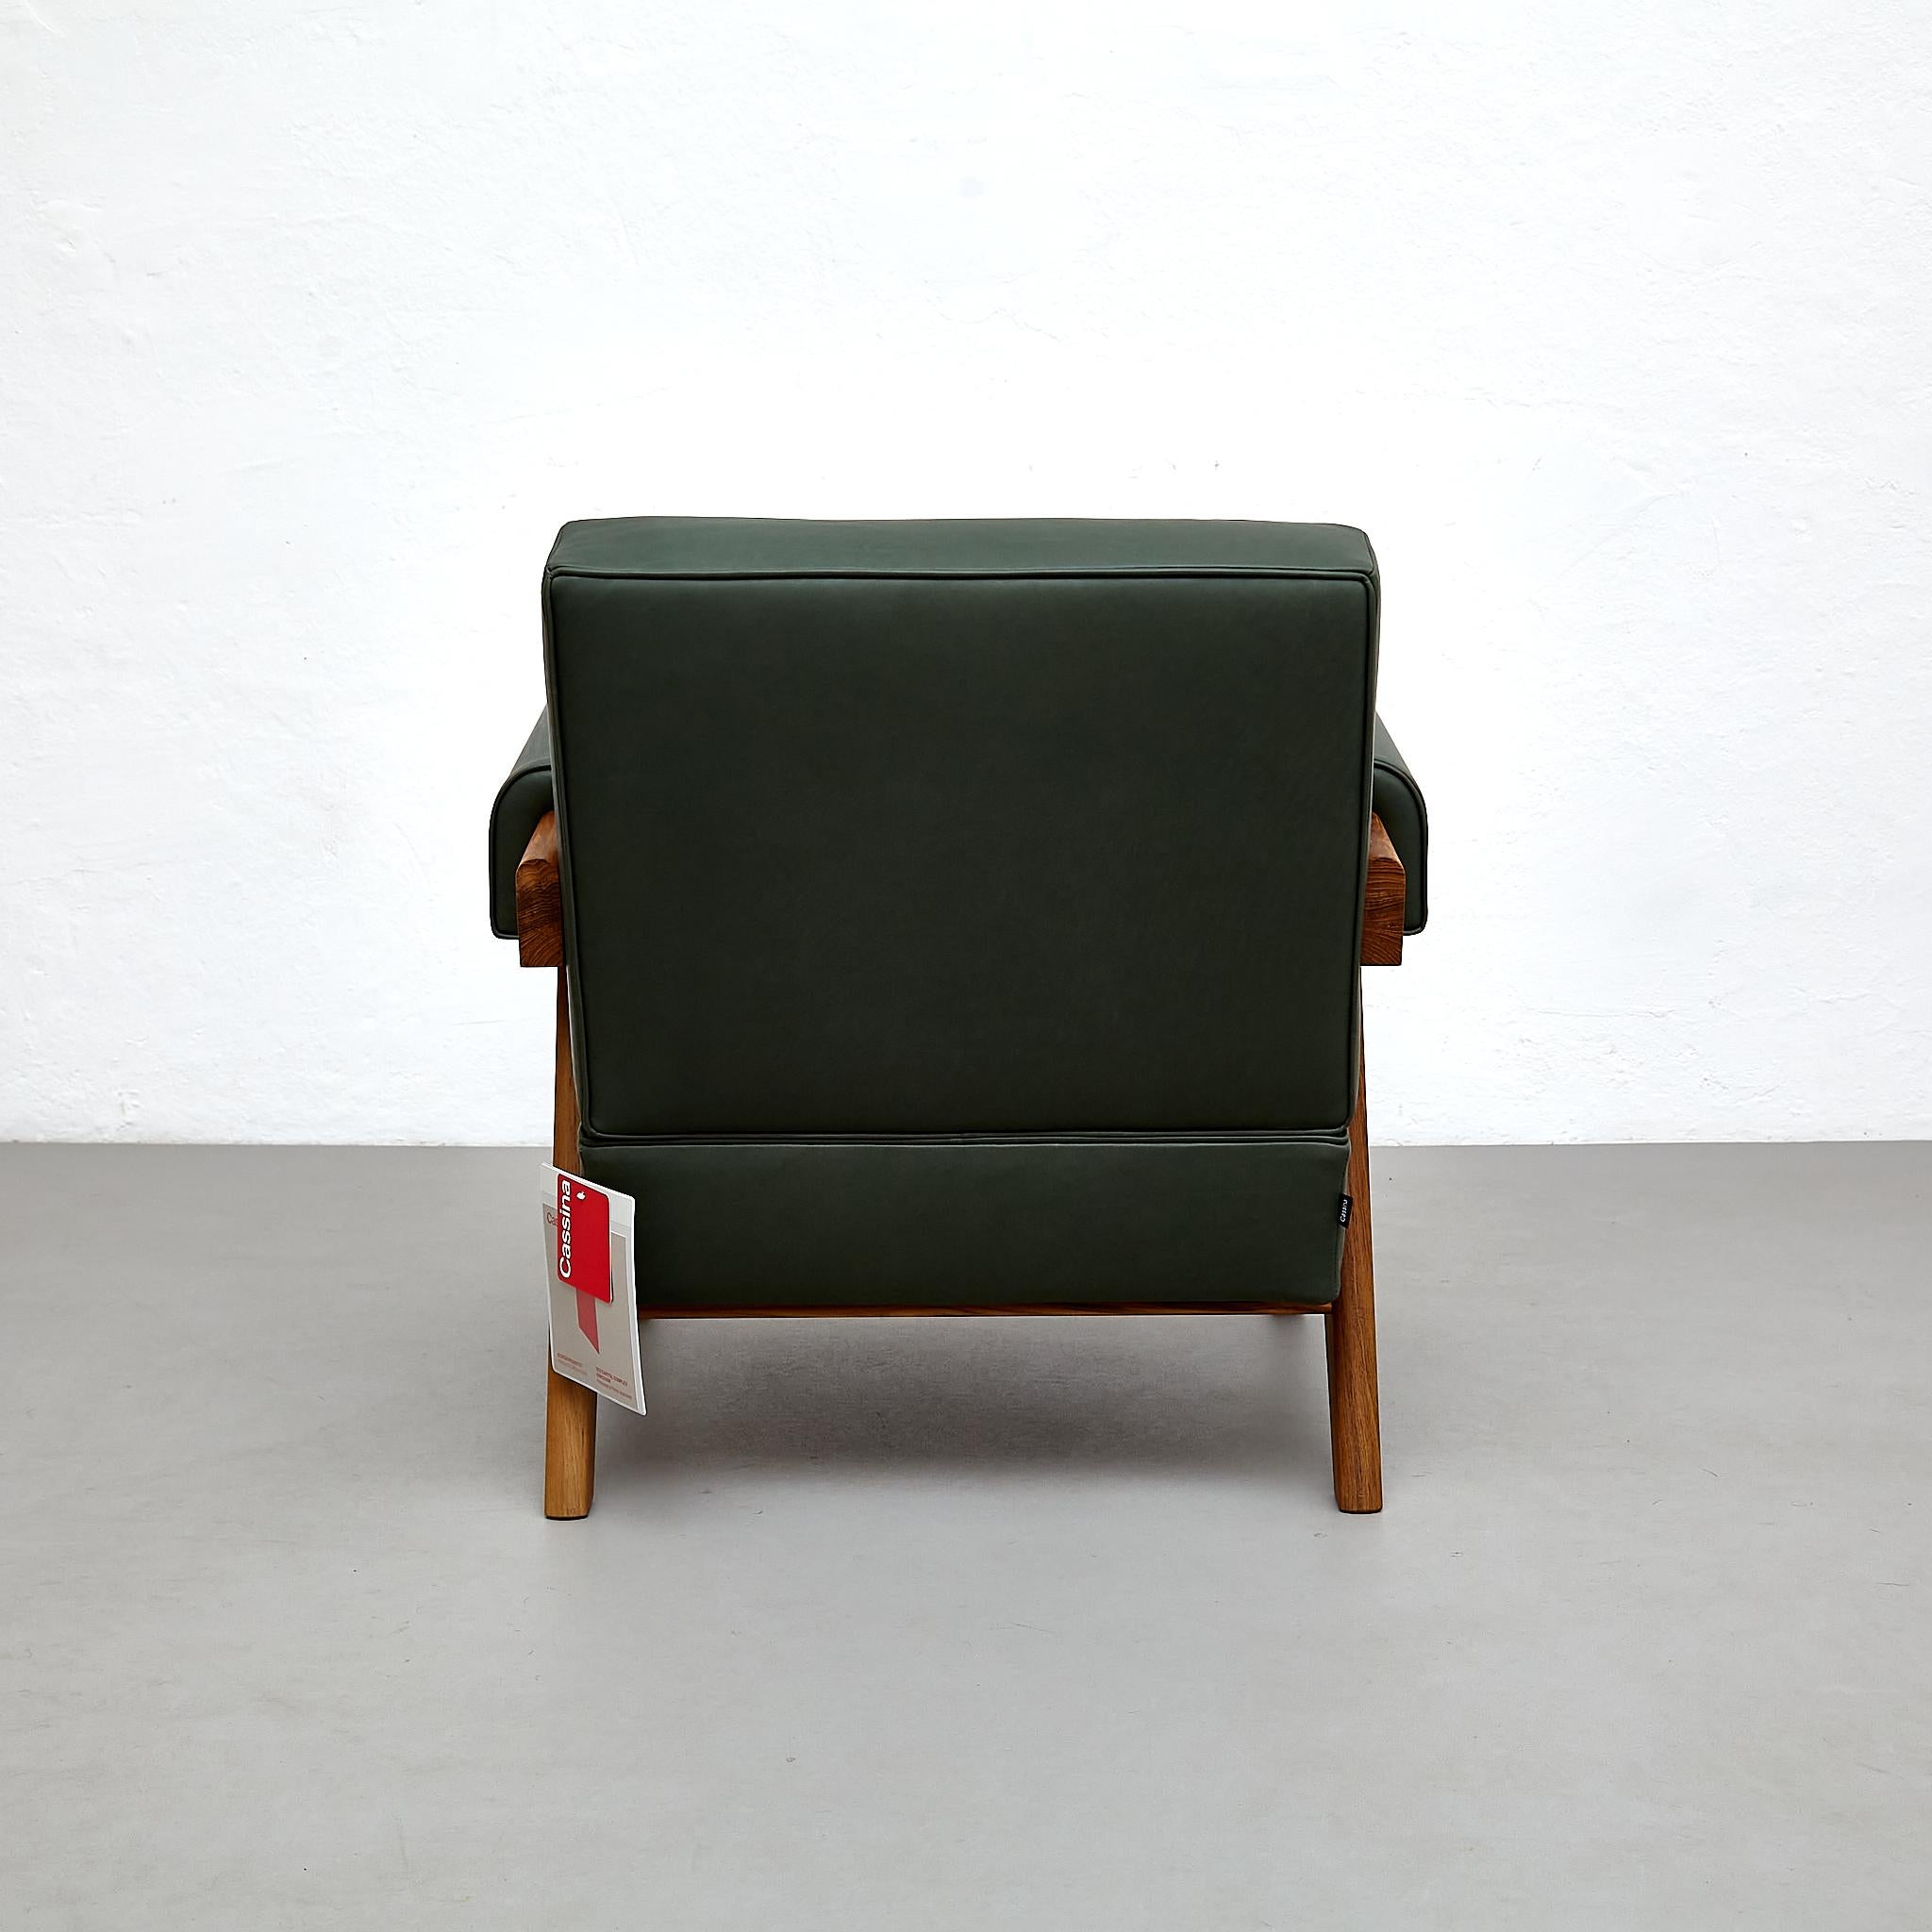 Set of Two Pierre Jeanneret Teak Wood Green Leather Armchair by Cassina For Sale 5